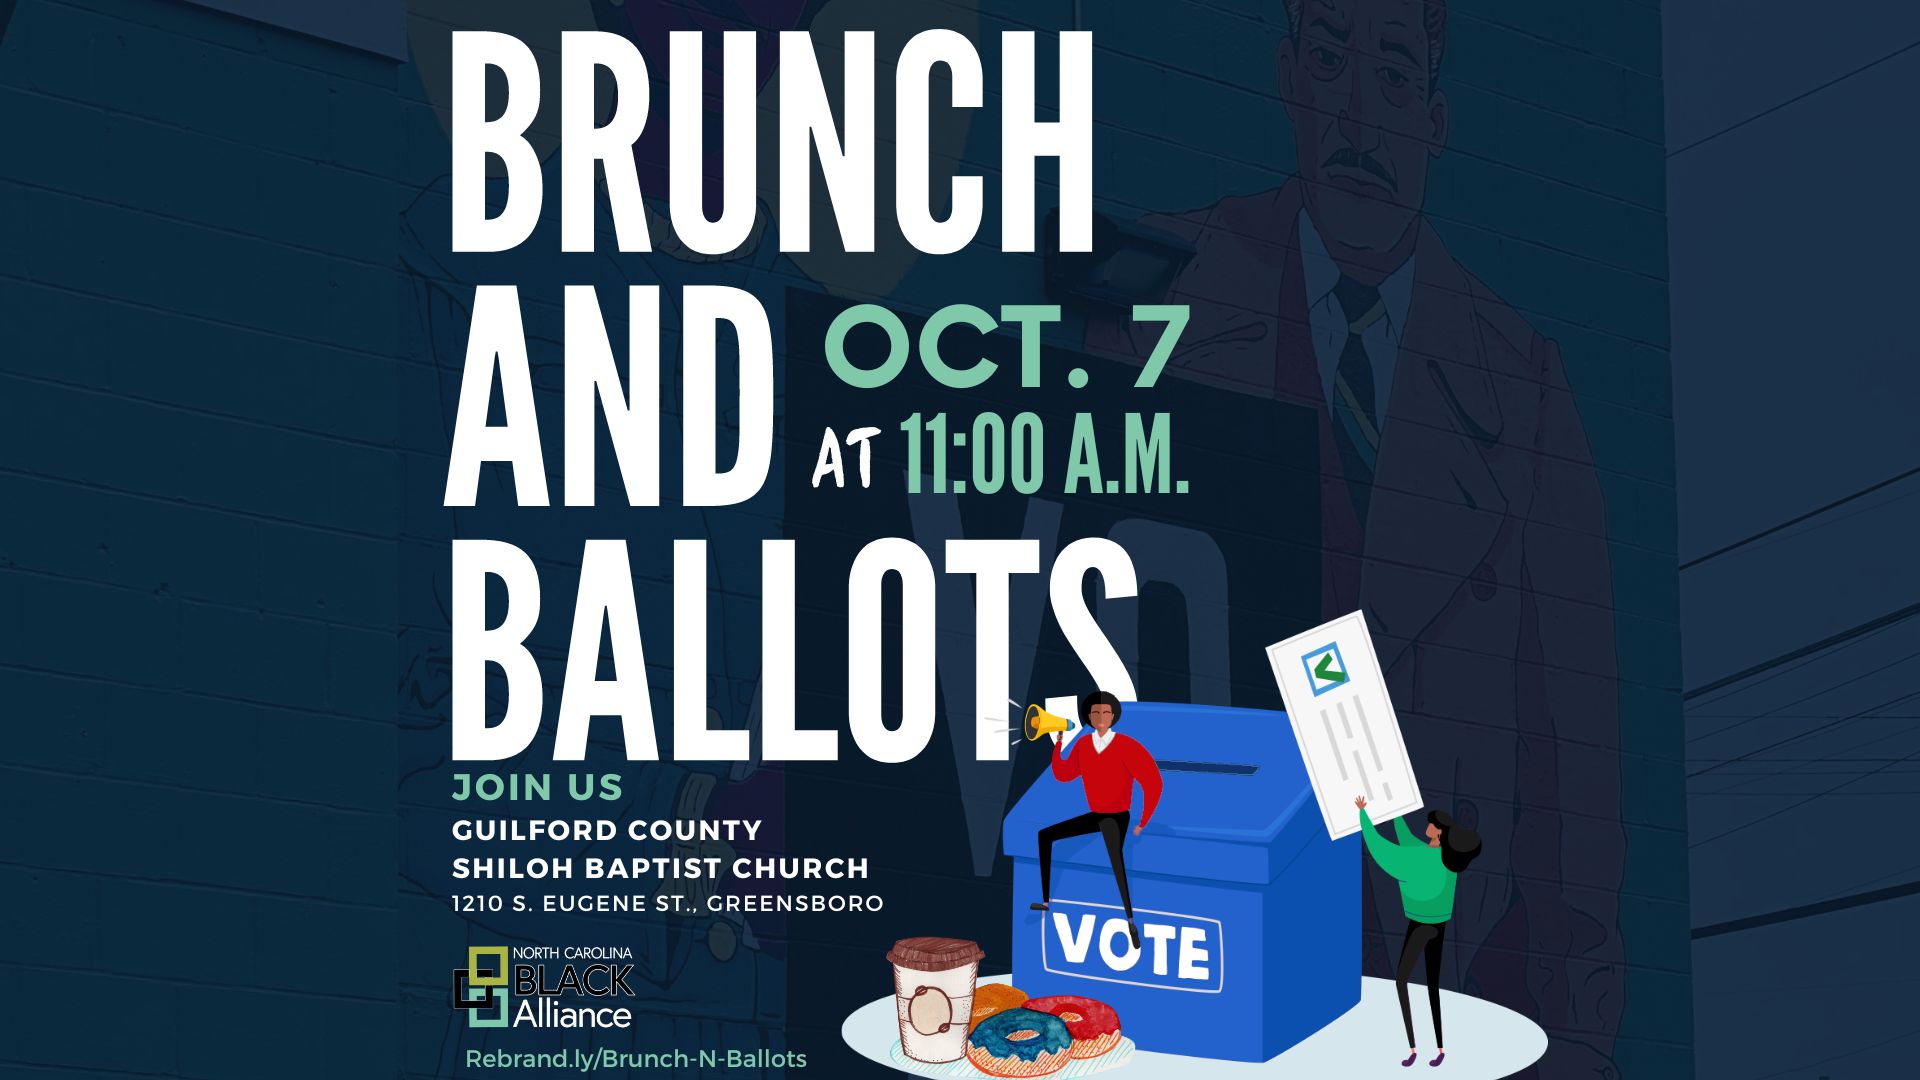 Brunch and Ballots Guilford